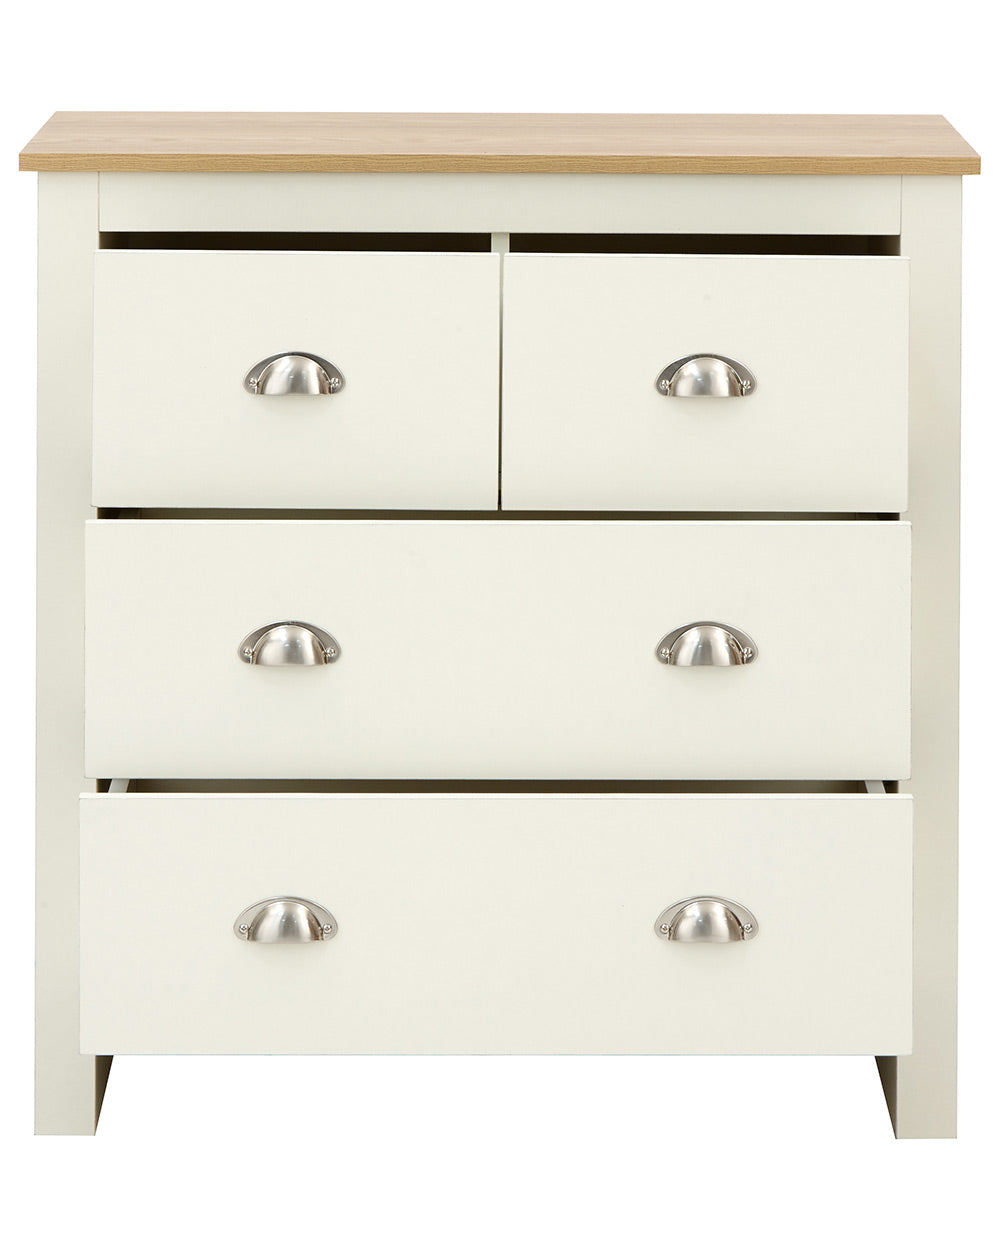 Lancaster 2 + 2 chest of drawers in cream with an oak effect top with all drawers open on a white cut out background